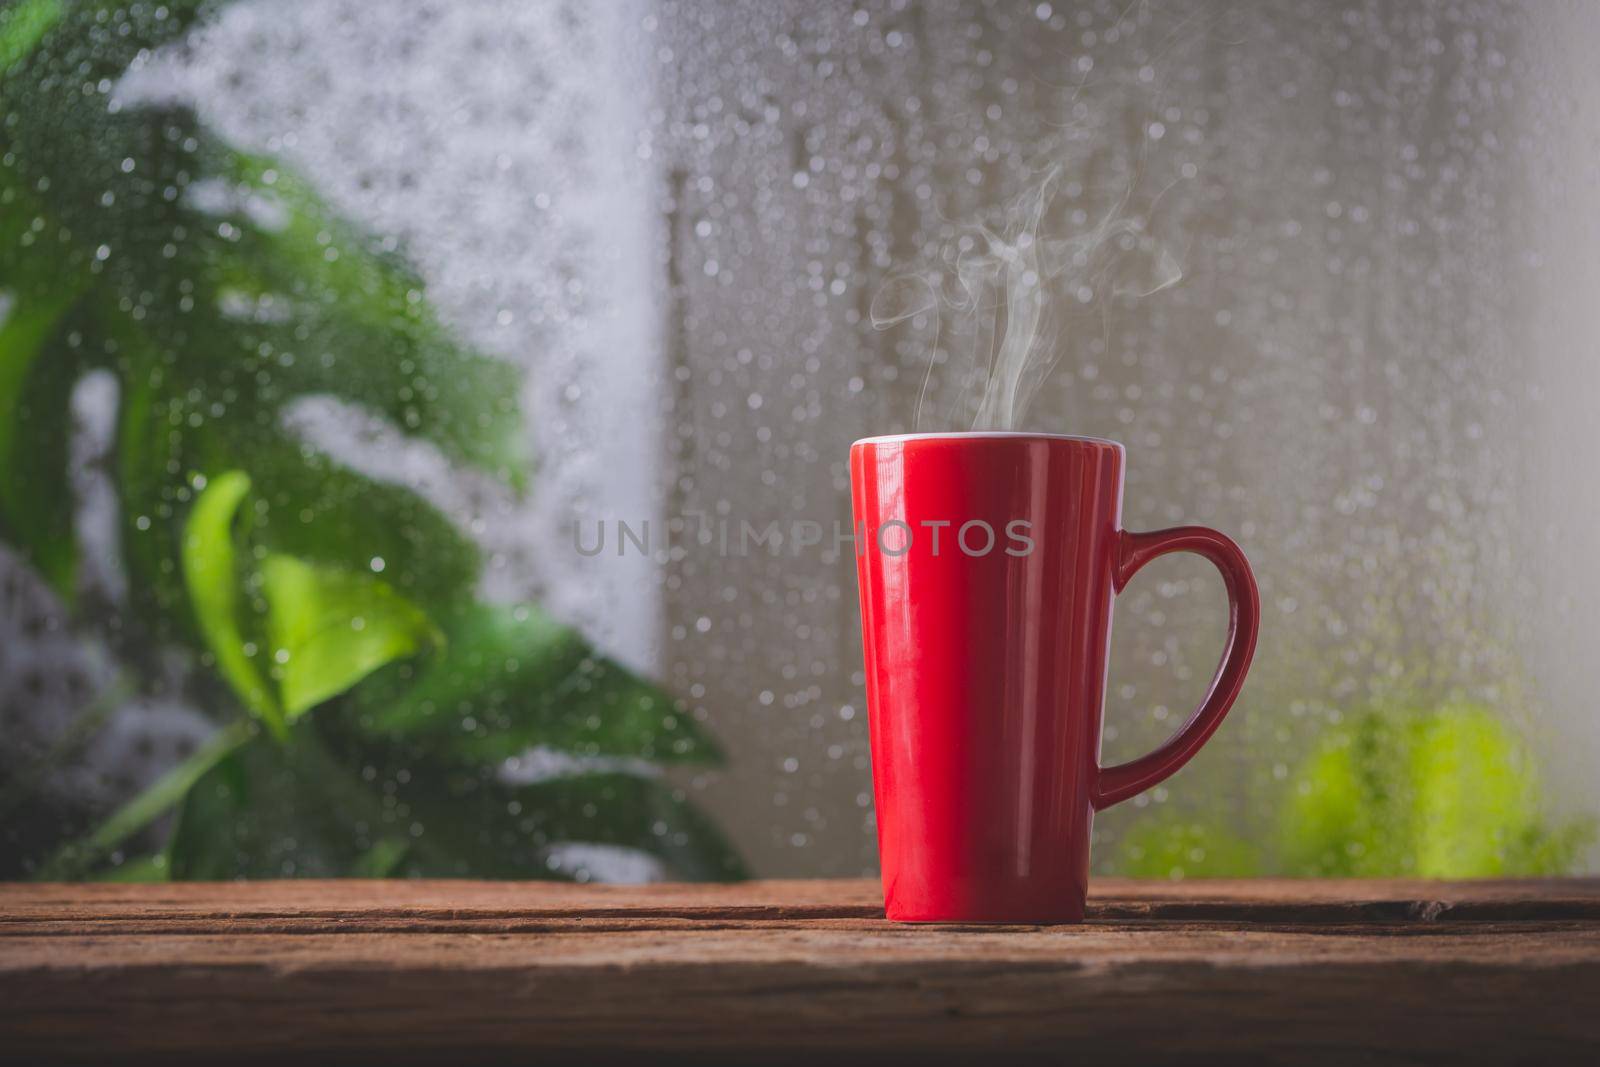 Red cup of coffee beside window and the rain on tropical plant background